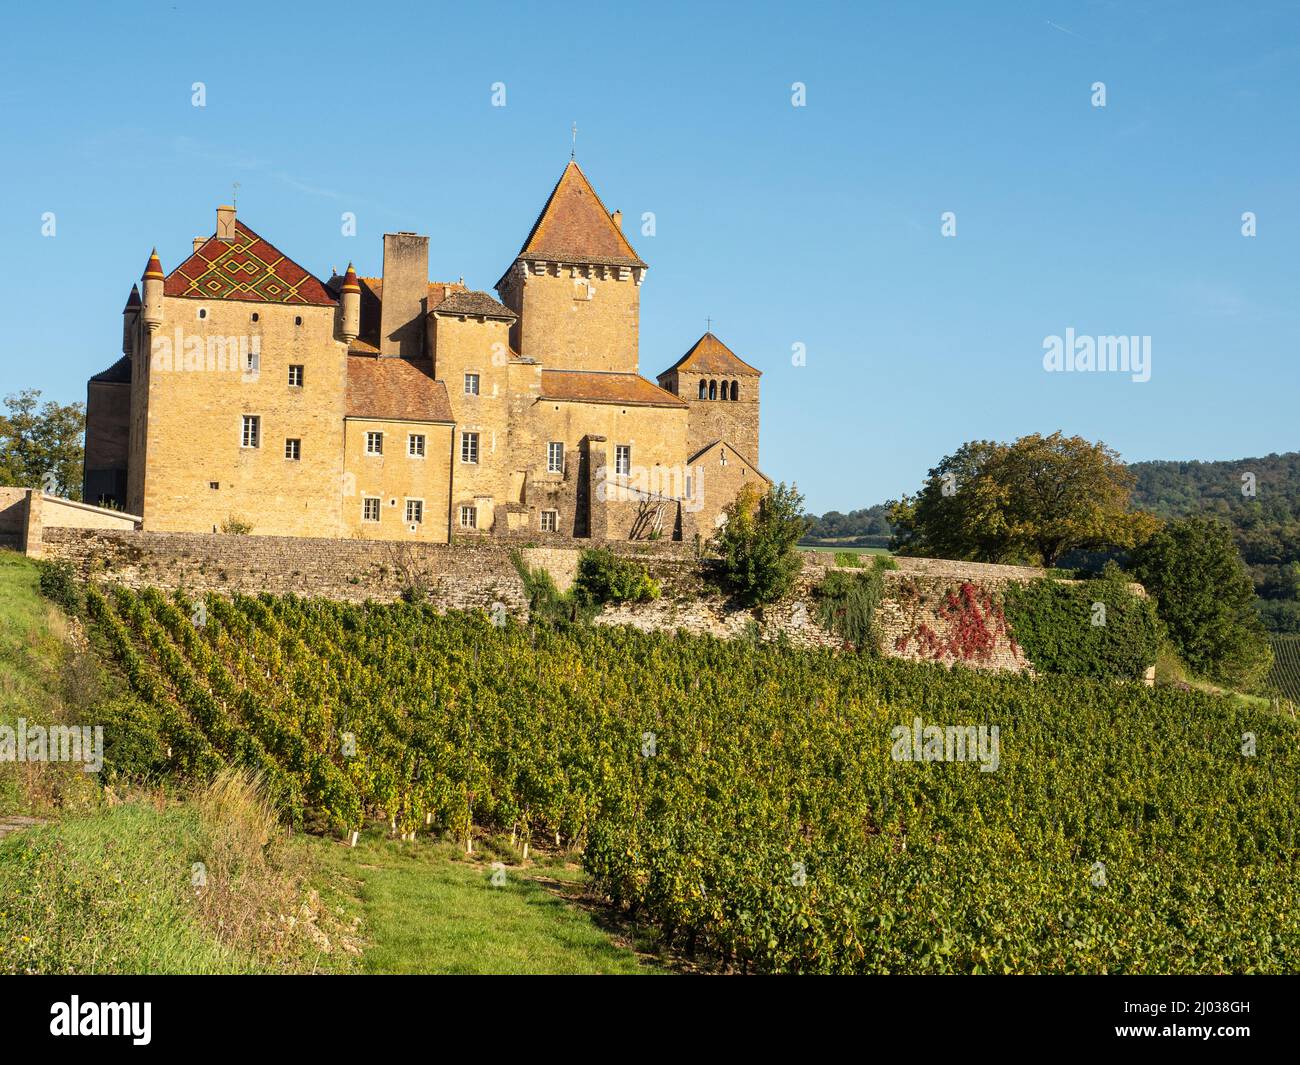 The Pierreclos Chateau and winery near Macon, Saone-et-Loire, Burgundy, France, Europe Stock Photo